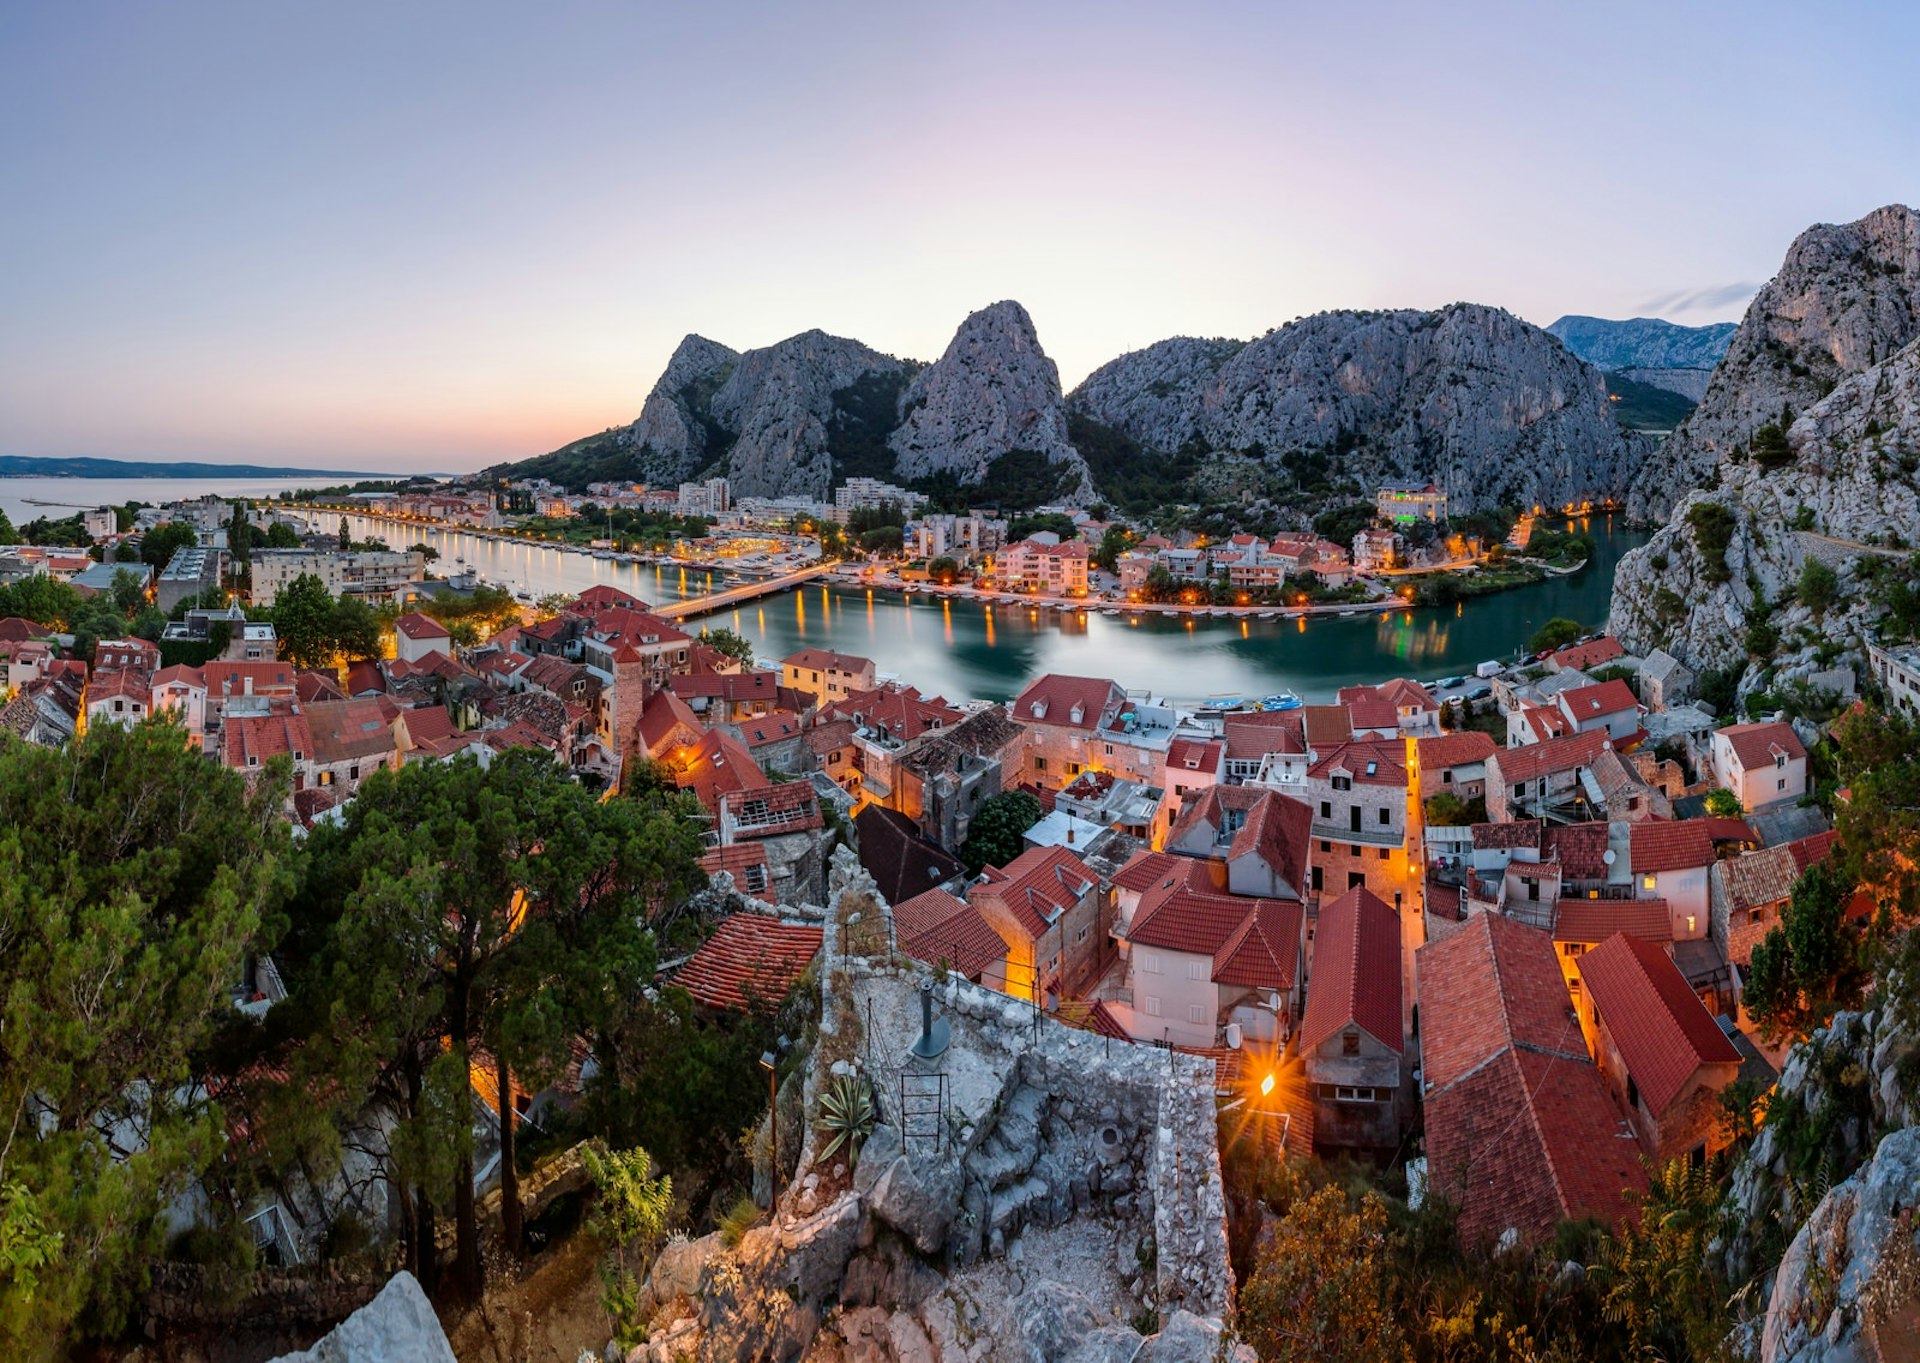 The sun sets behind towering mountains, as the Cetina river flows through Omiš ©Andrey Omelyanchuk / 500px 